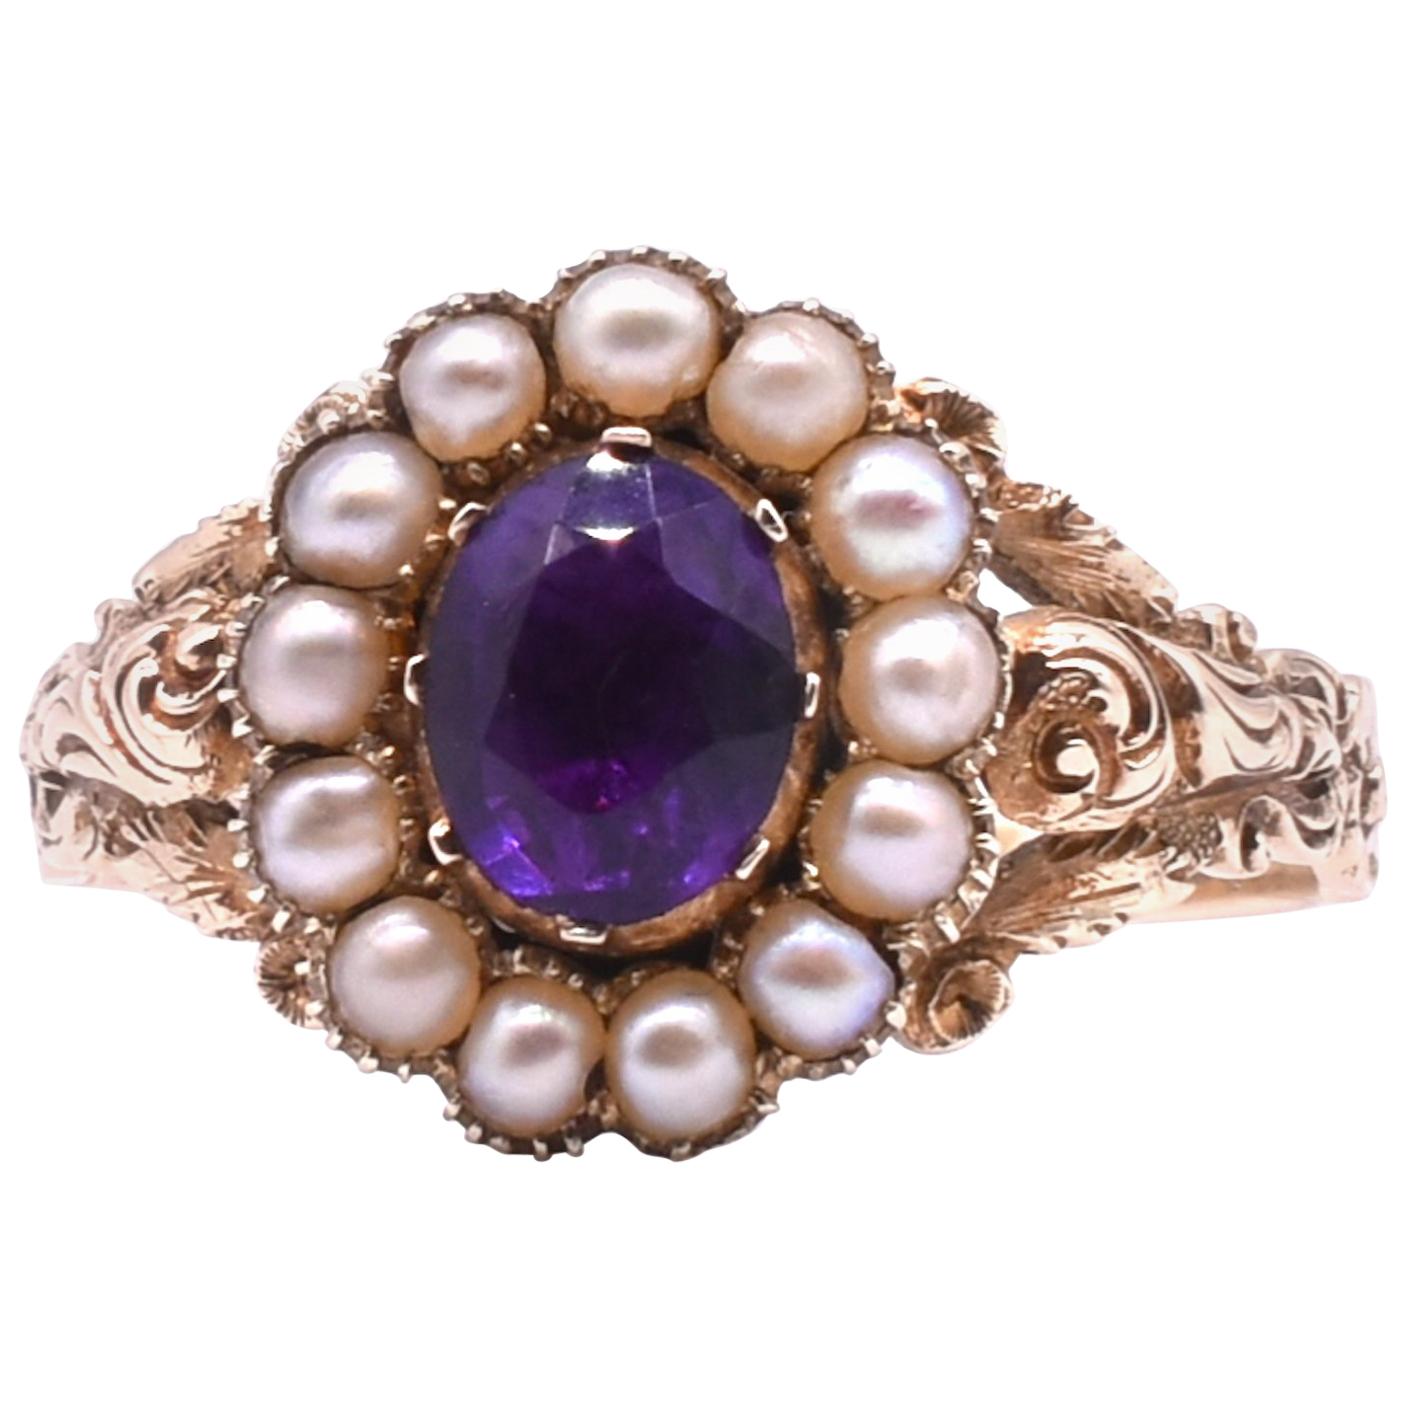 Antique Early Victorian Gold, Amethyst and Seed Pearl Ring, circa 1850